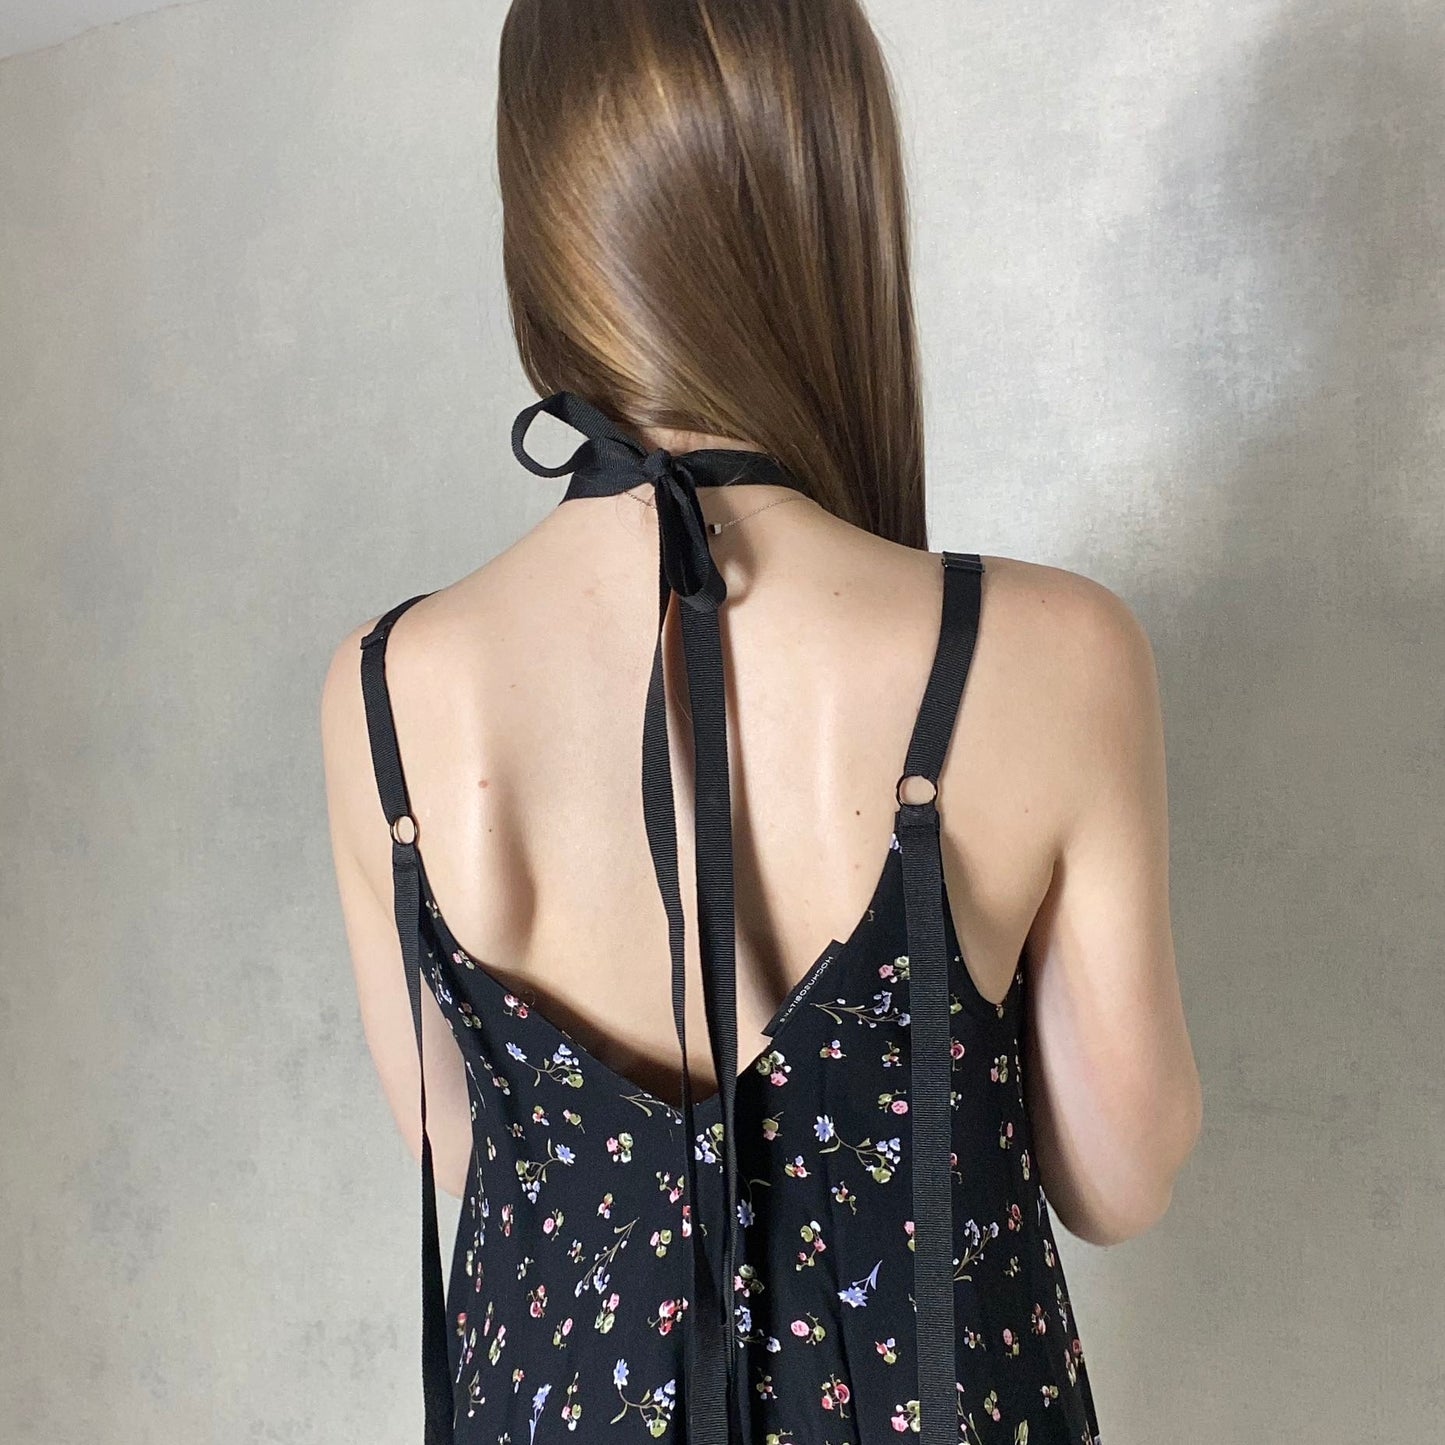 Black dress with ribbons with a floral print